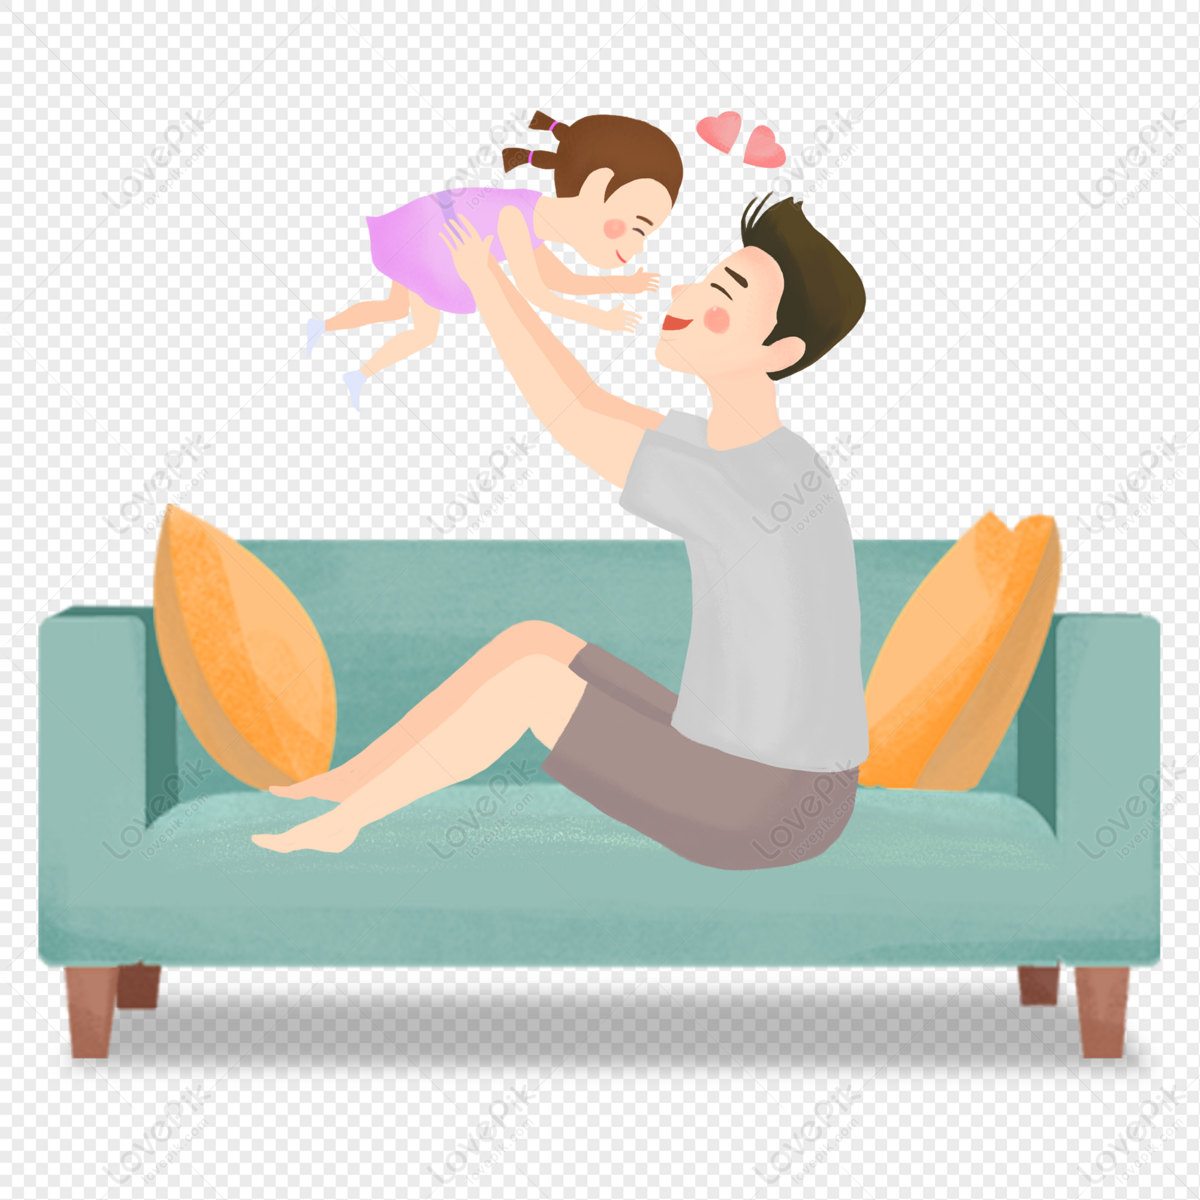 Dad Raises The Baby PNG Transparent Image And Clipart Image For Free  Download - Lovepik | 401356787